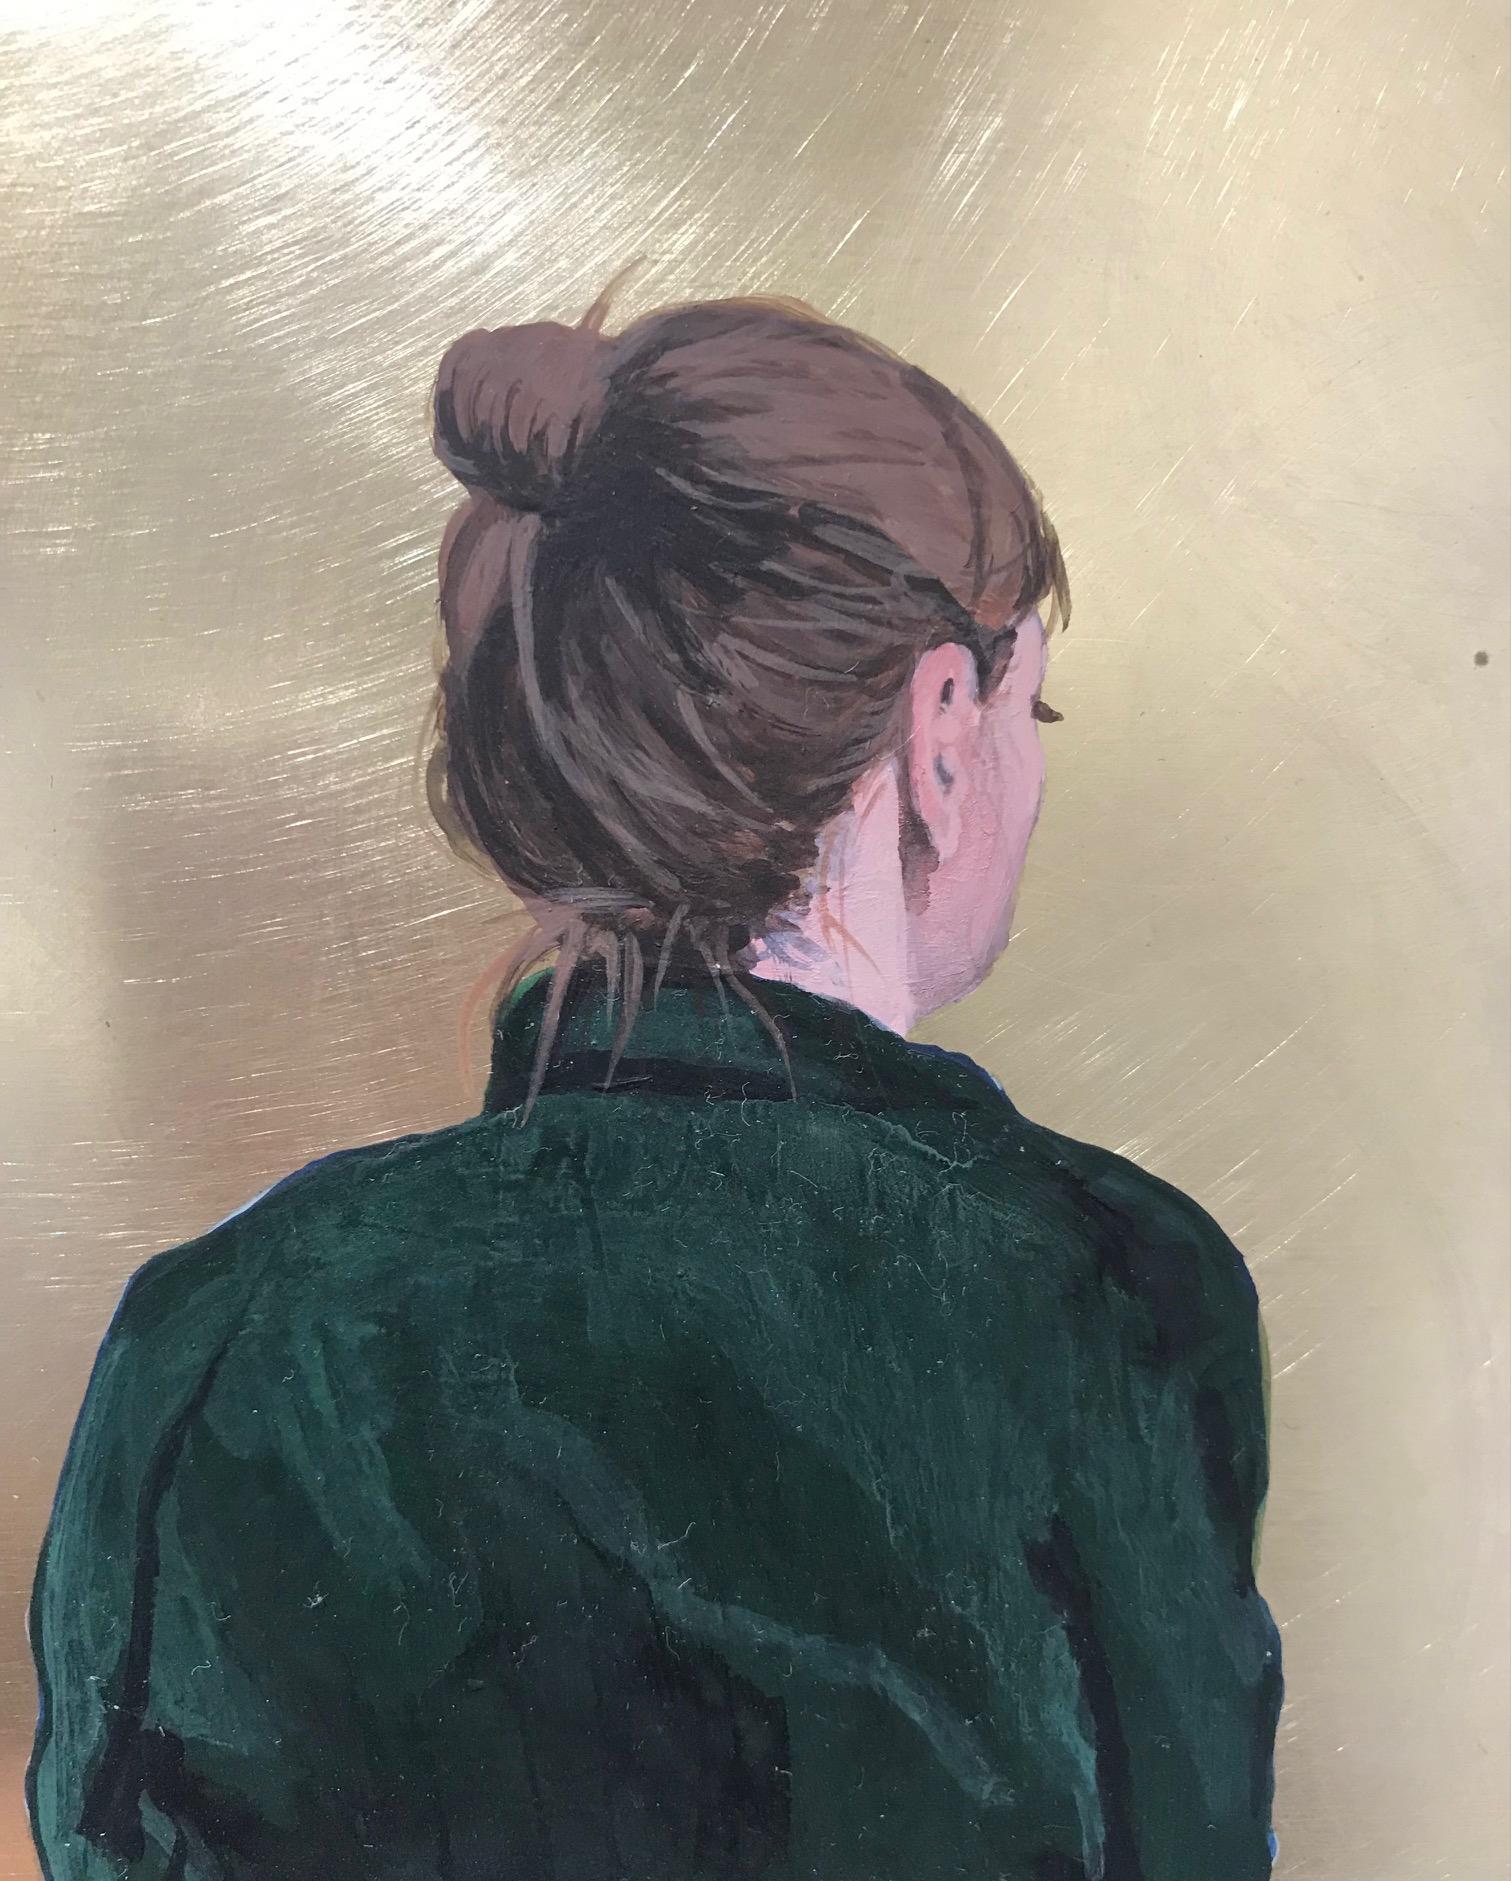 Karoline Kroiß (1975), born in Austria, mainly paints realistic female figures with acrylic paint on paper or canvas.

The women in her work seem to be lost in thought, serene scenes enhanced by the neutral background. We see these women en profile,